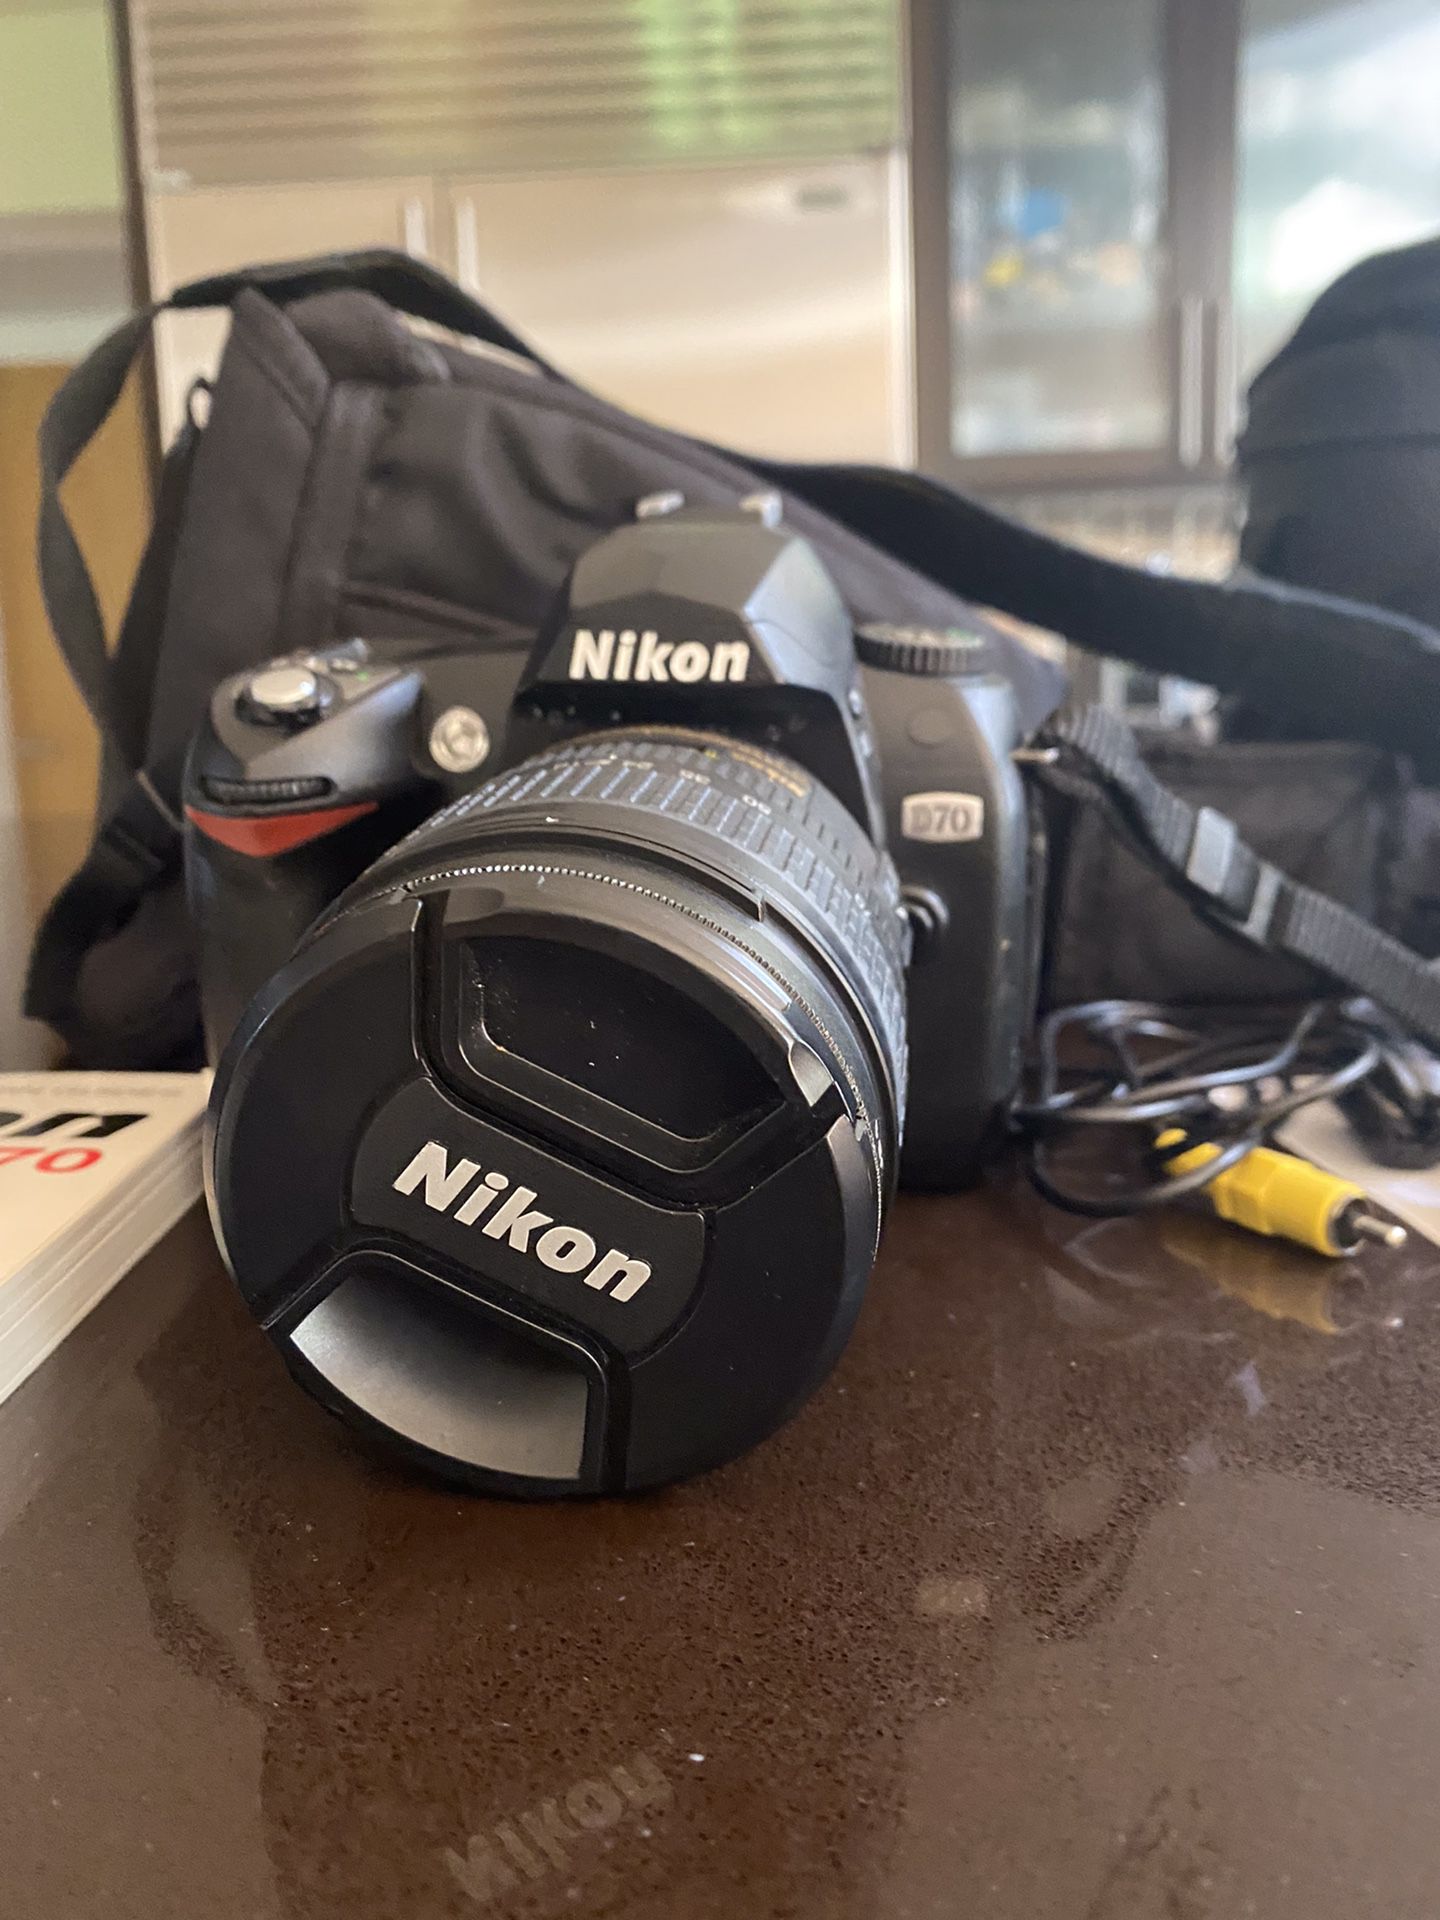 Nikon SLR camera Tamron Telephoto Lens & Accessories for Sale in Huntington, NY - OfferUp